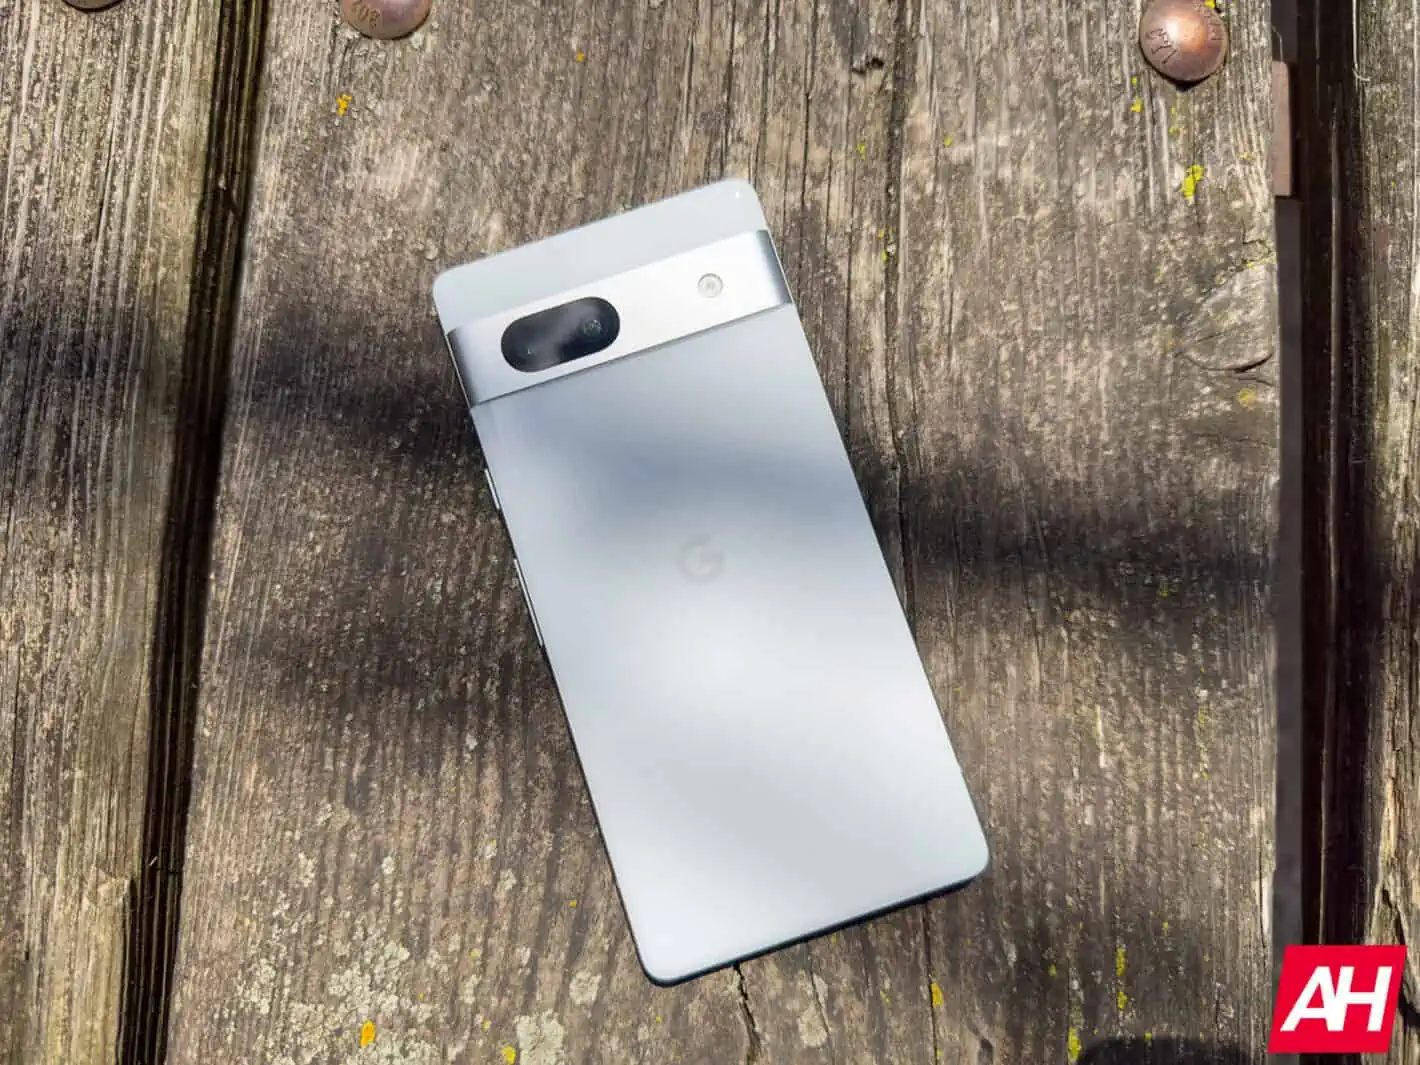 Featured image for Pixel 8a has already surfaced on Geekbench, along with specs